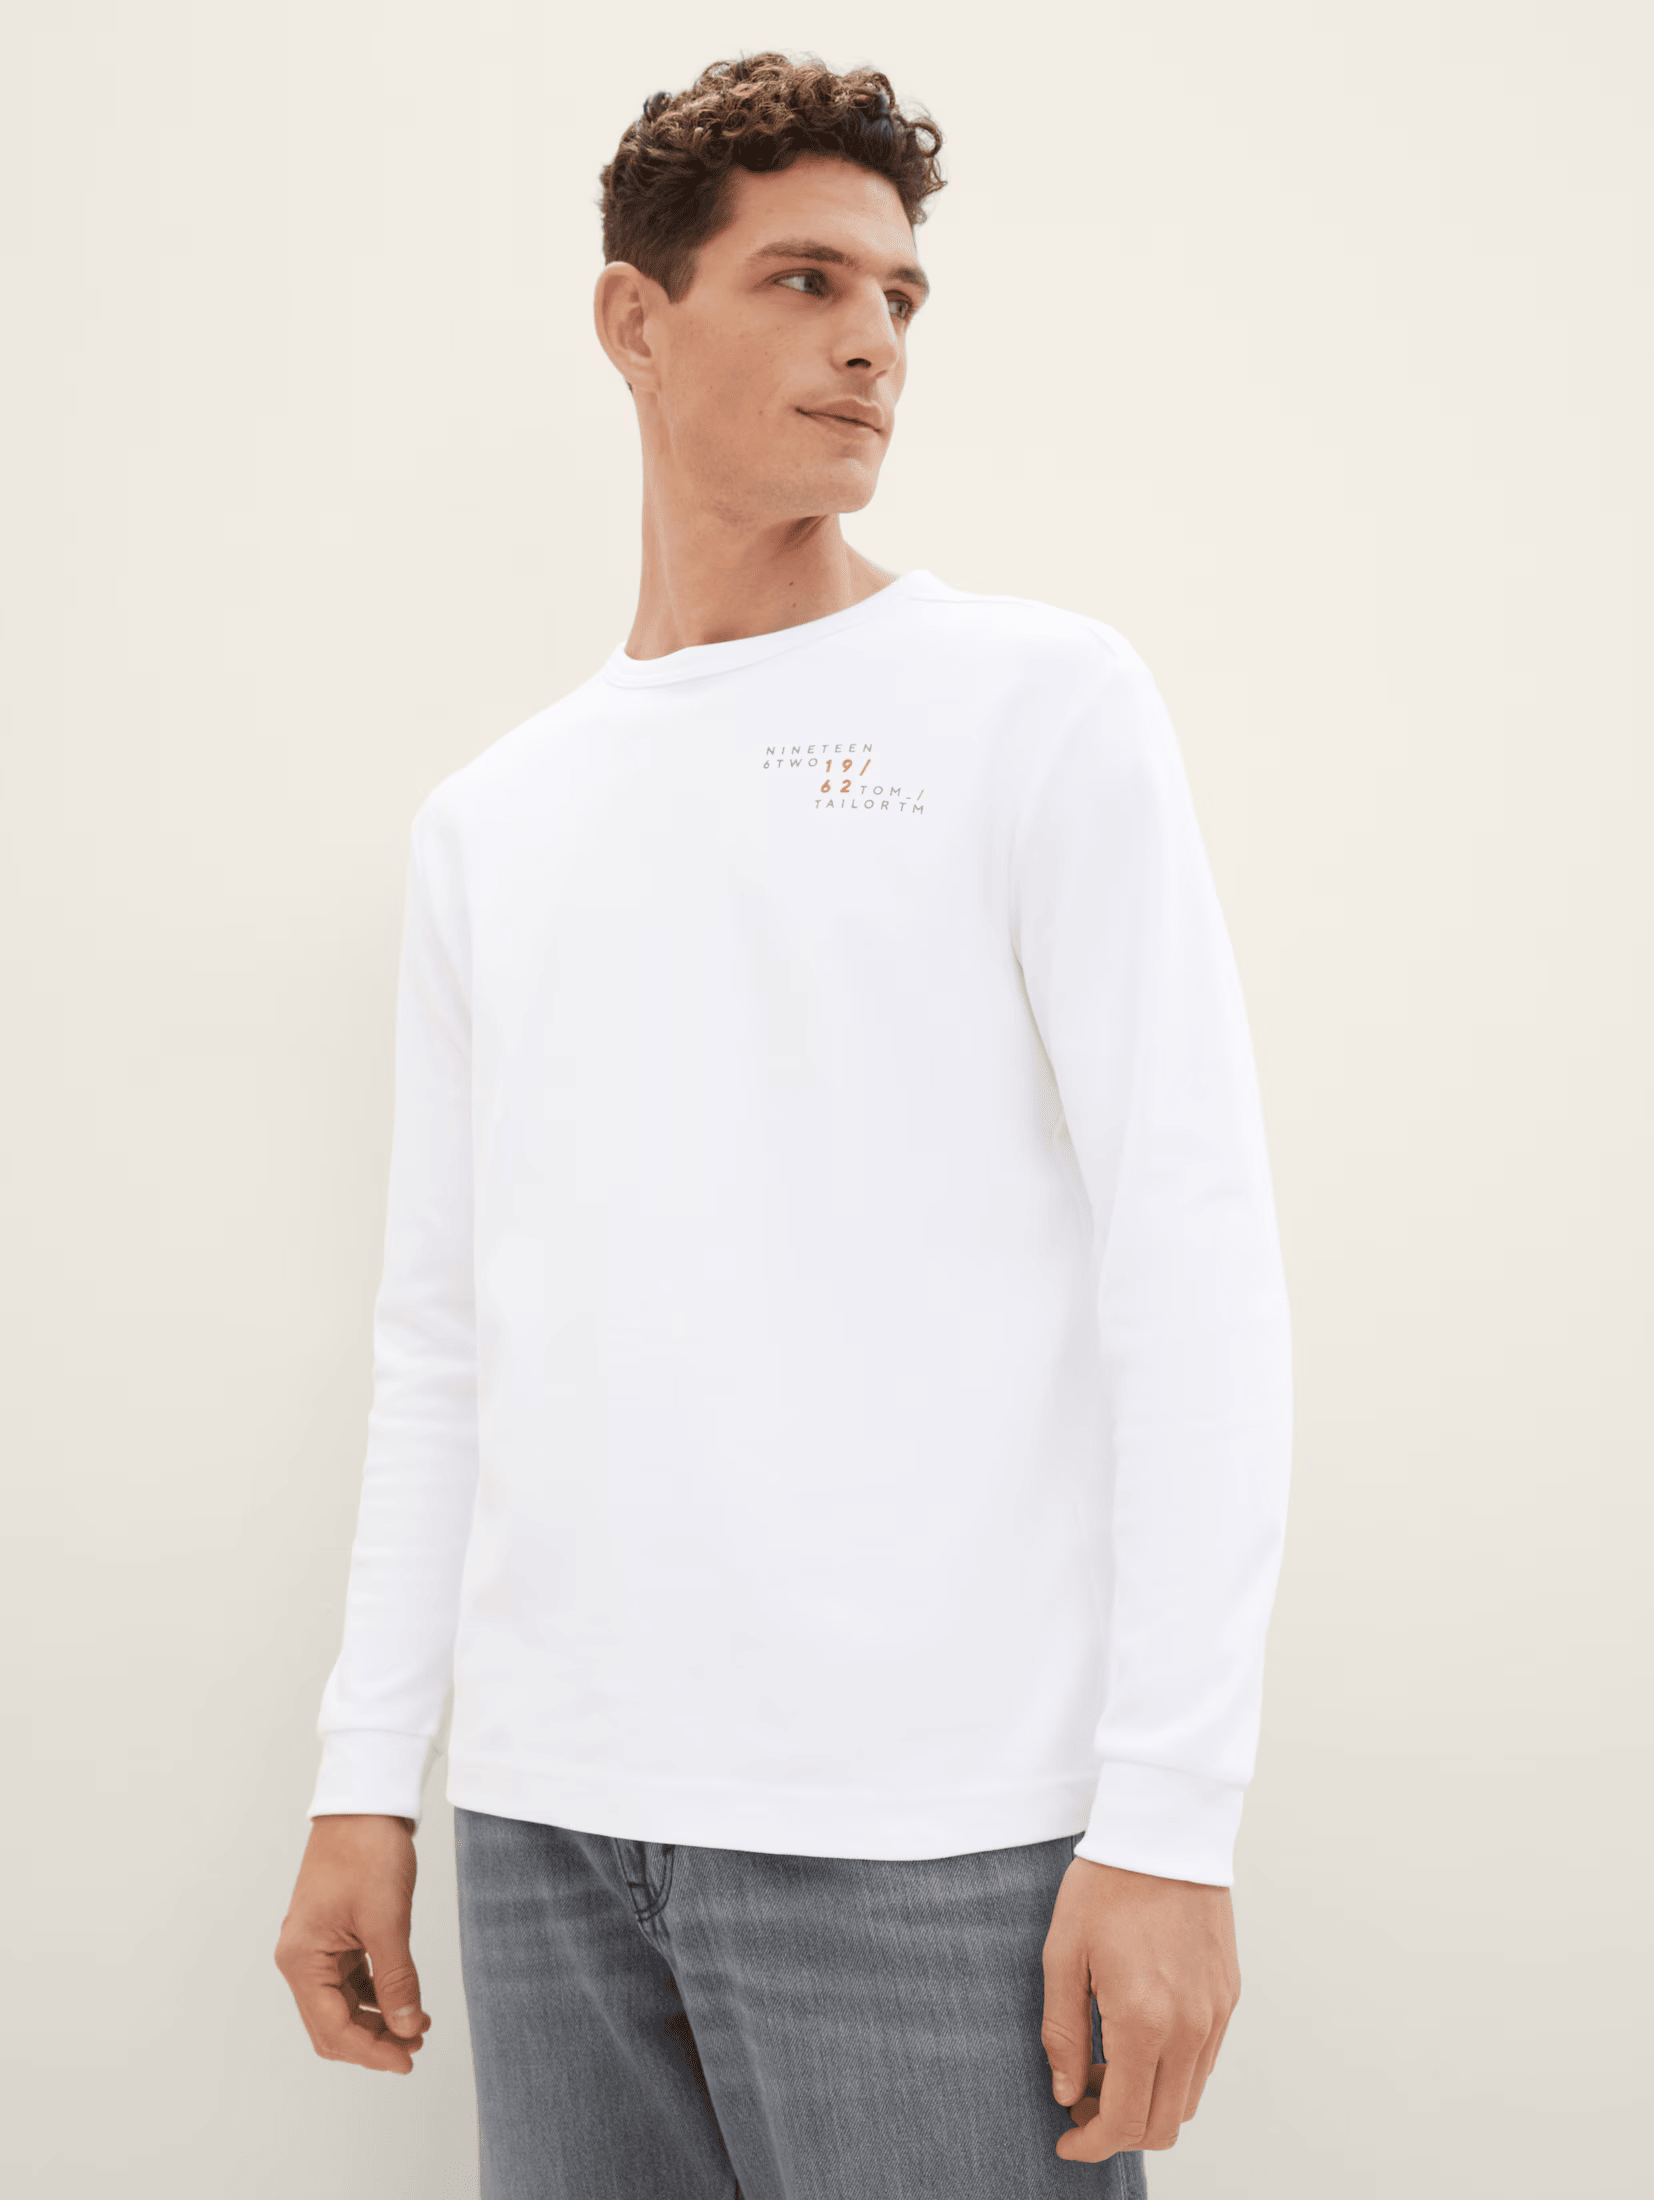 Tom Tailor White Basic Long-sleeved T-shirt With A Print